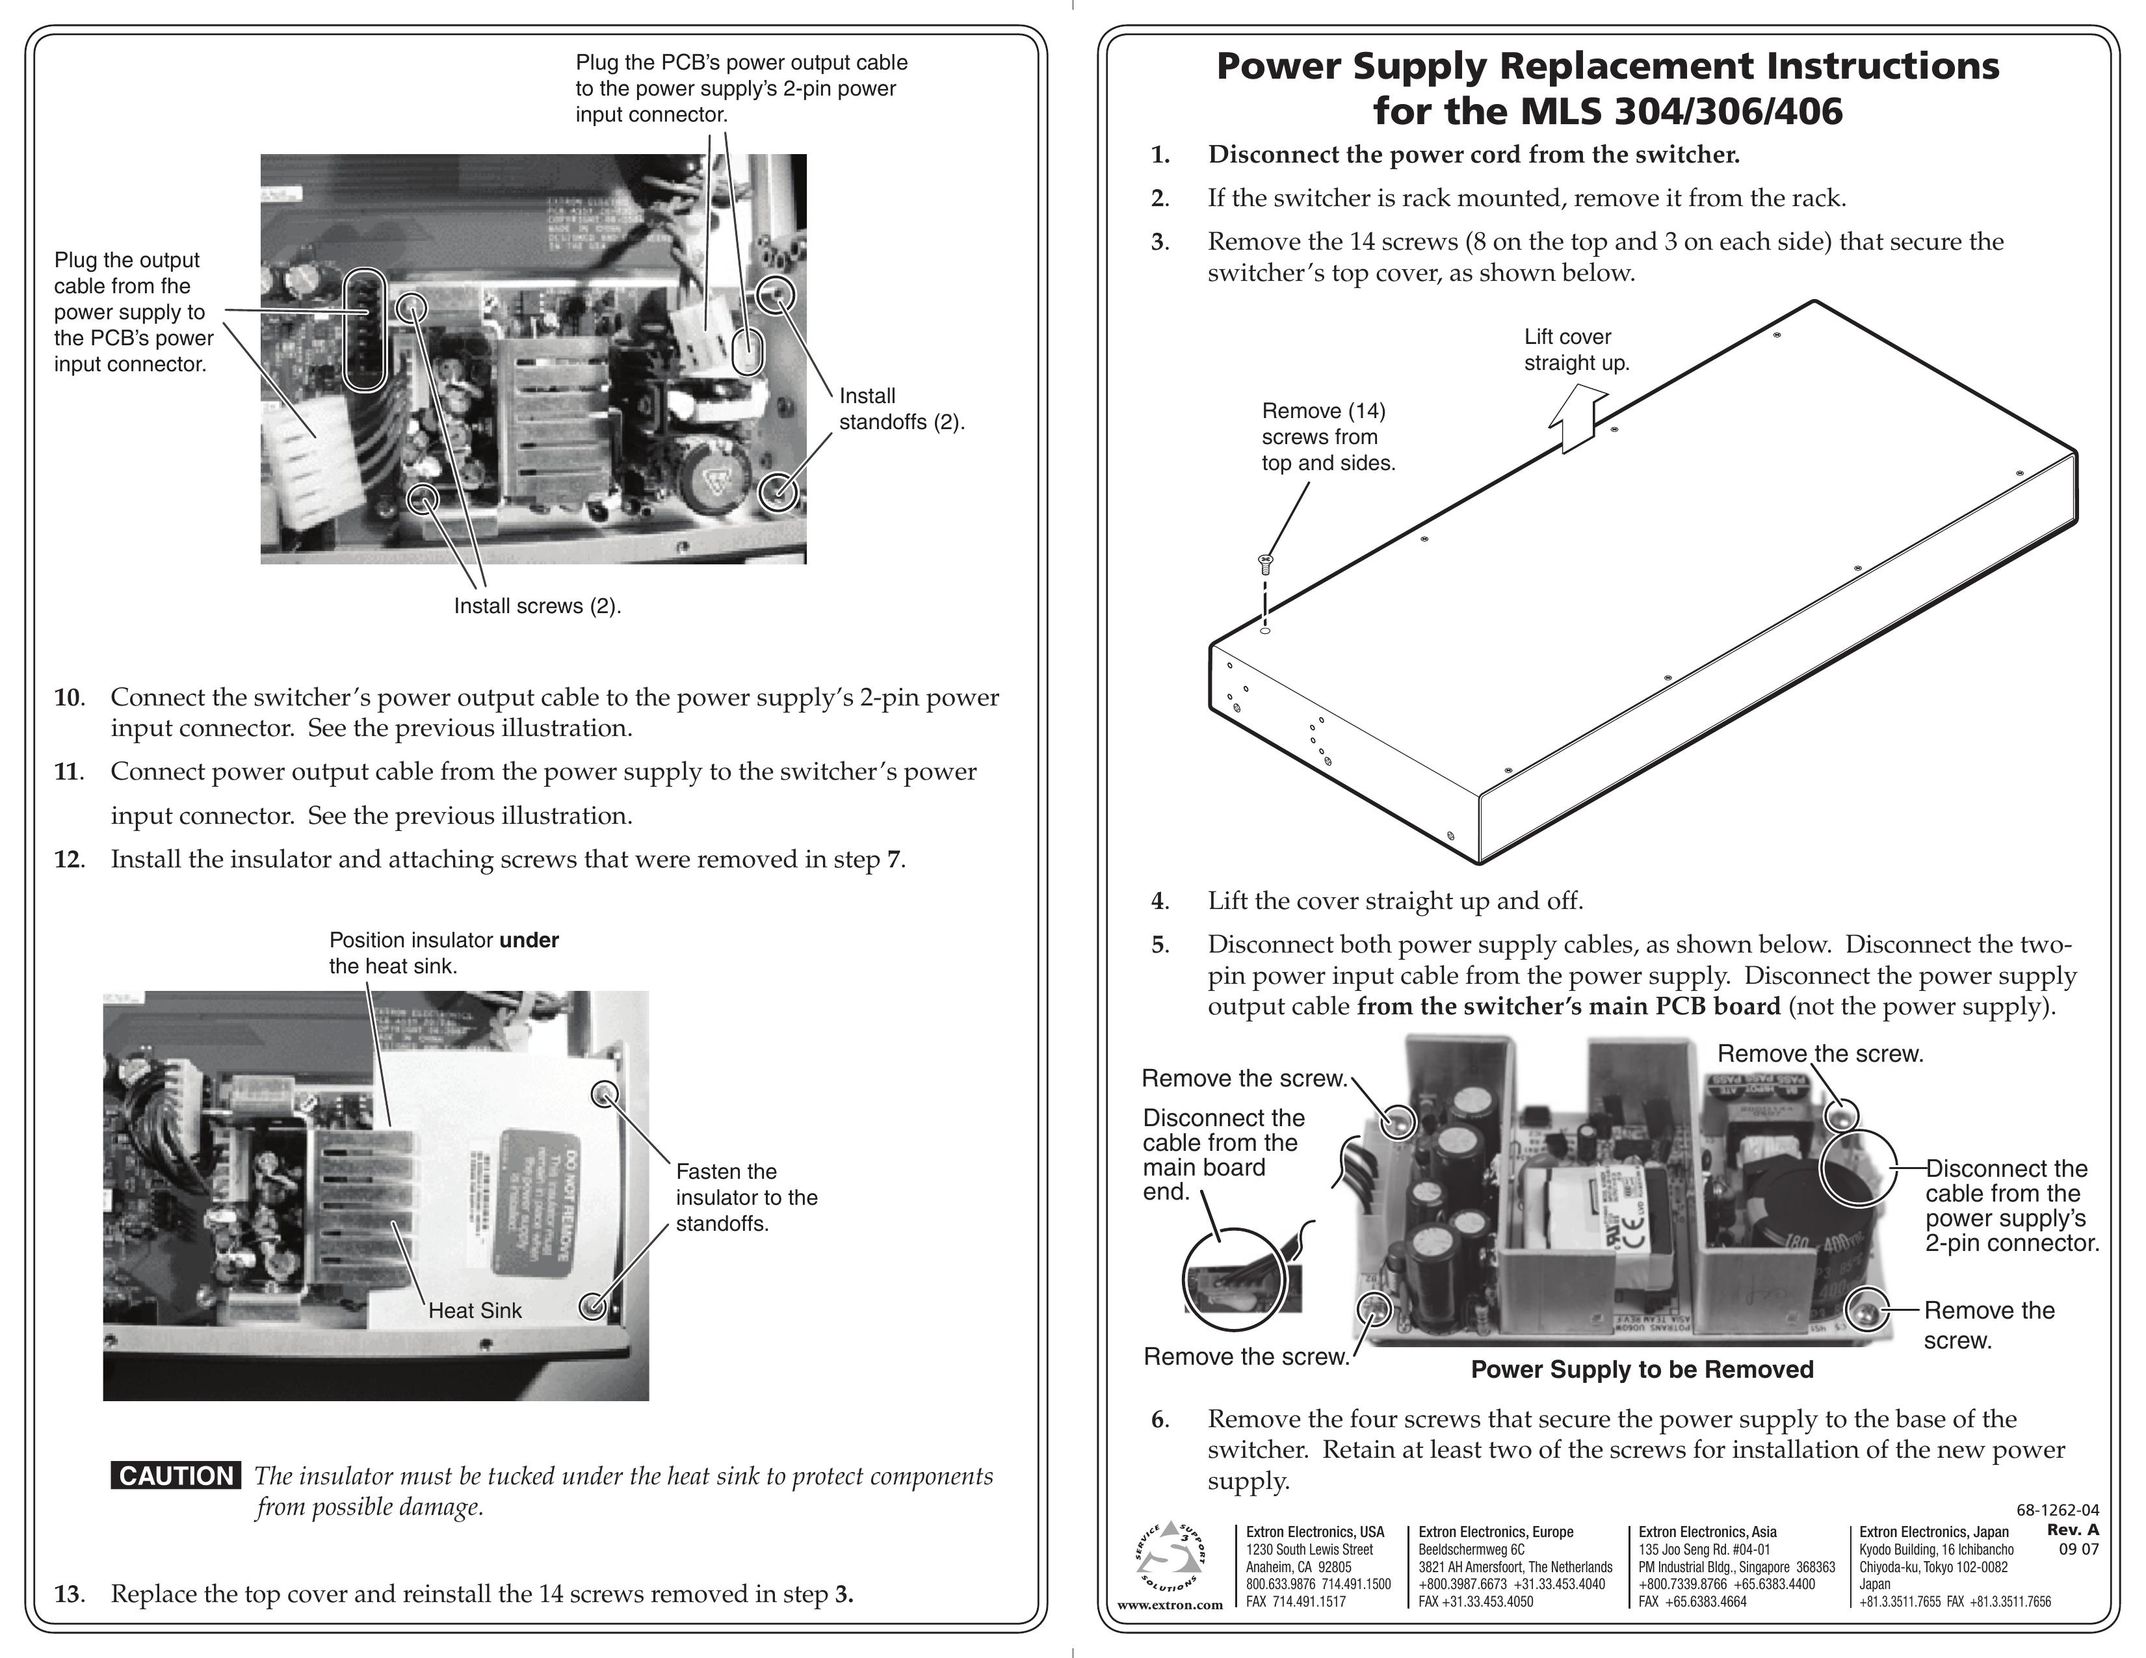 Extron electronic 406 Power Supply User Manual